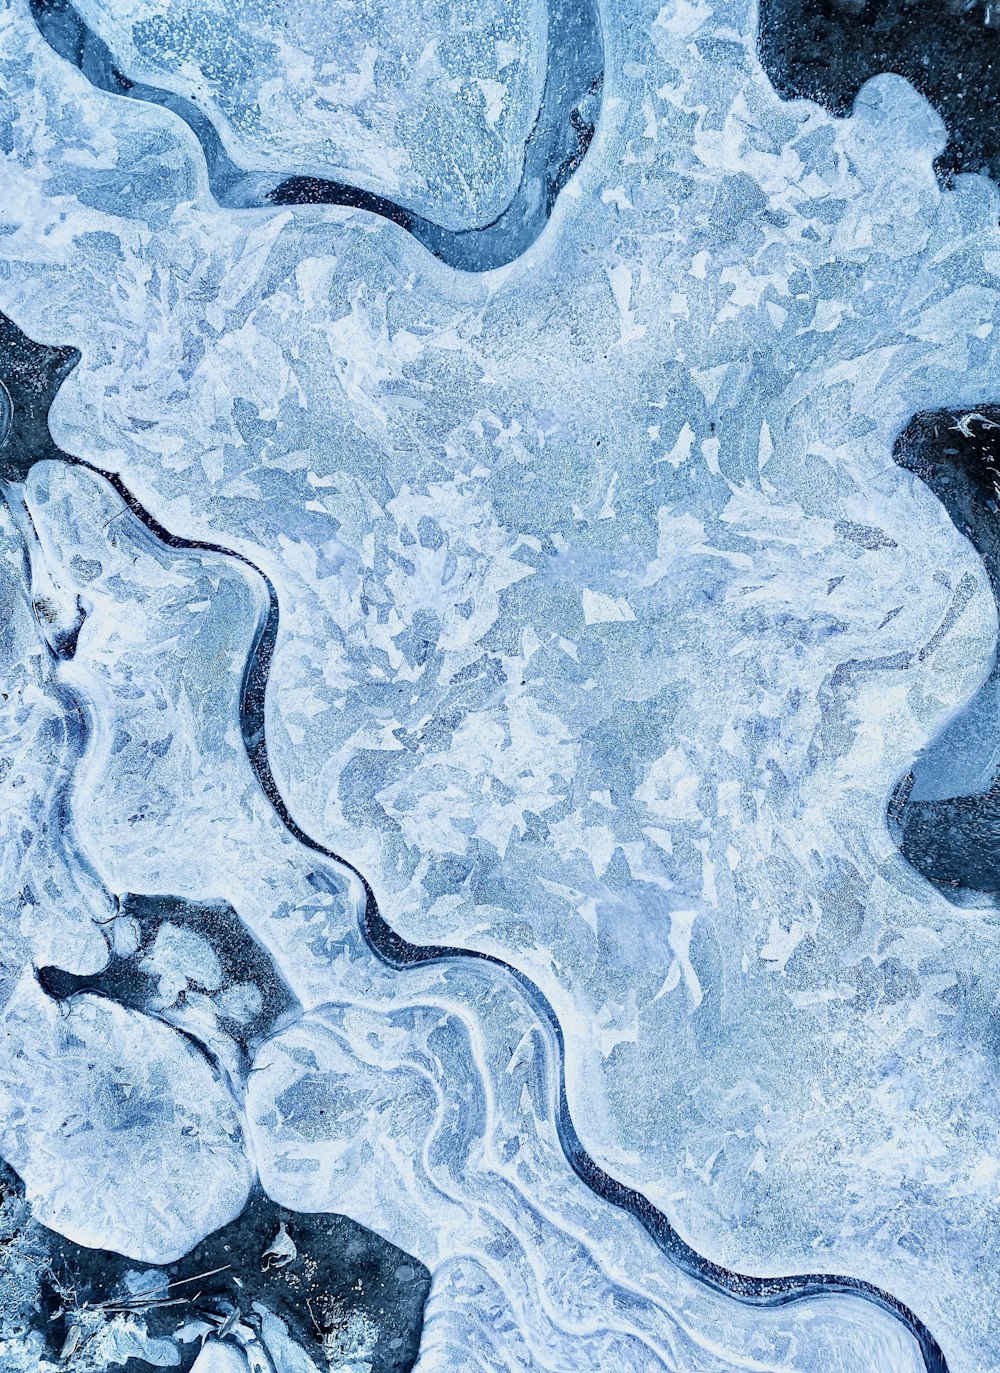 a close up of ice and water with a sky background